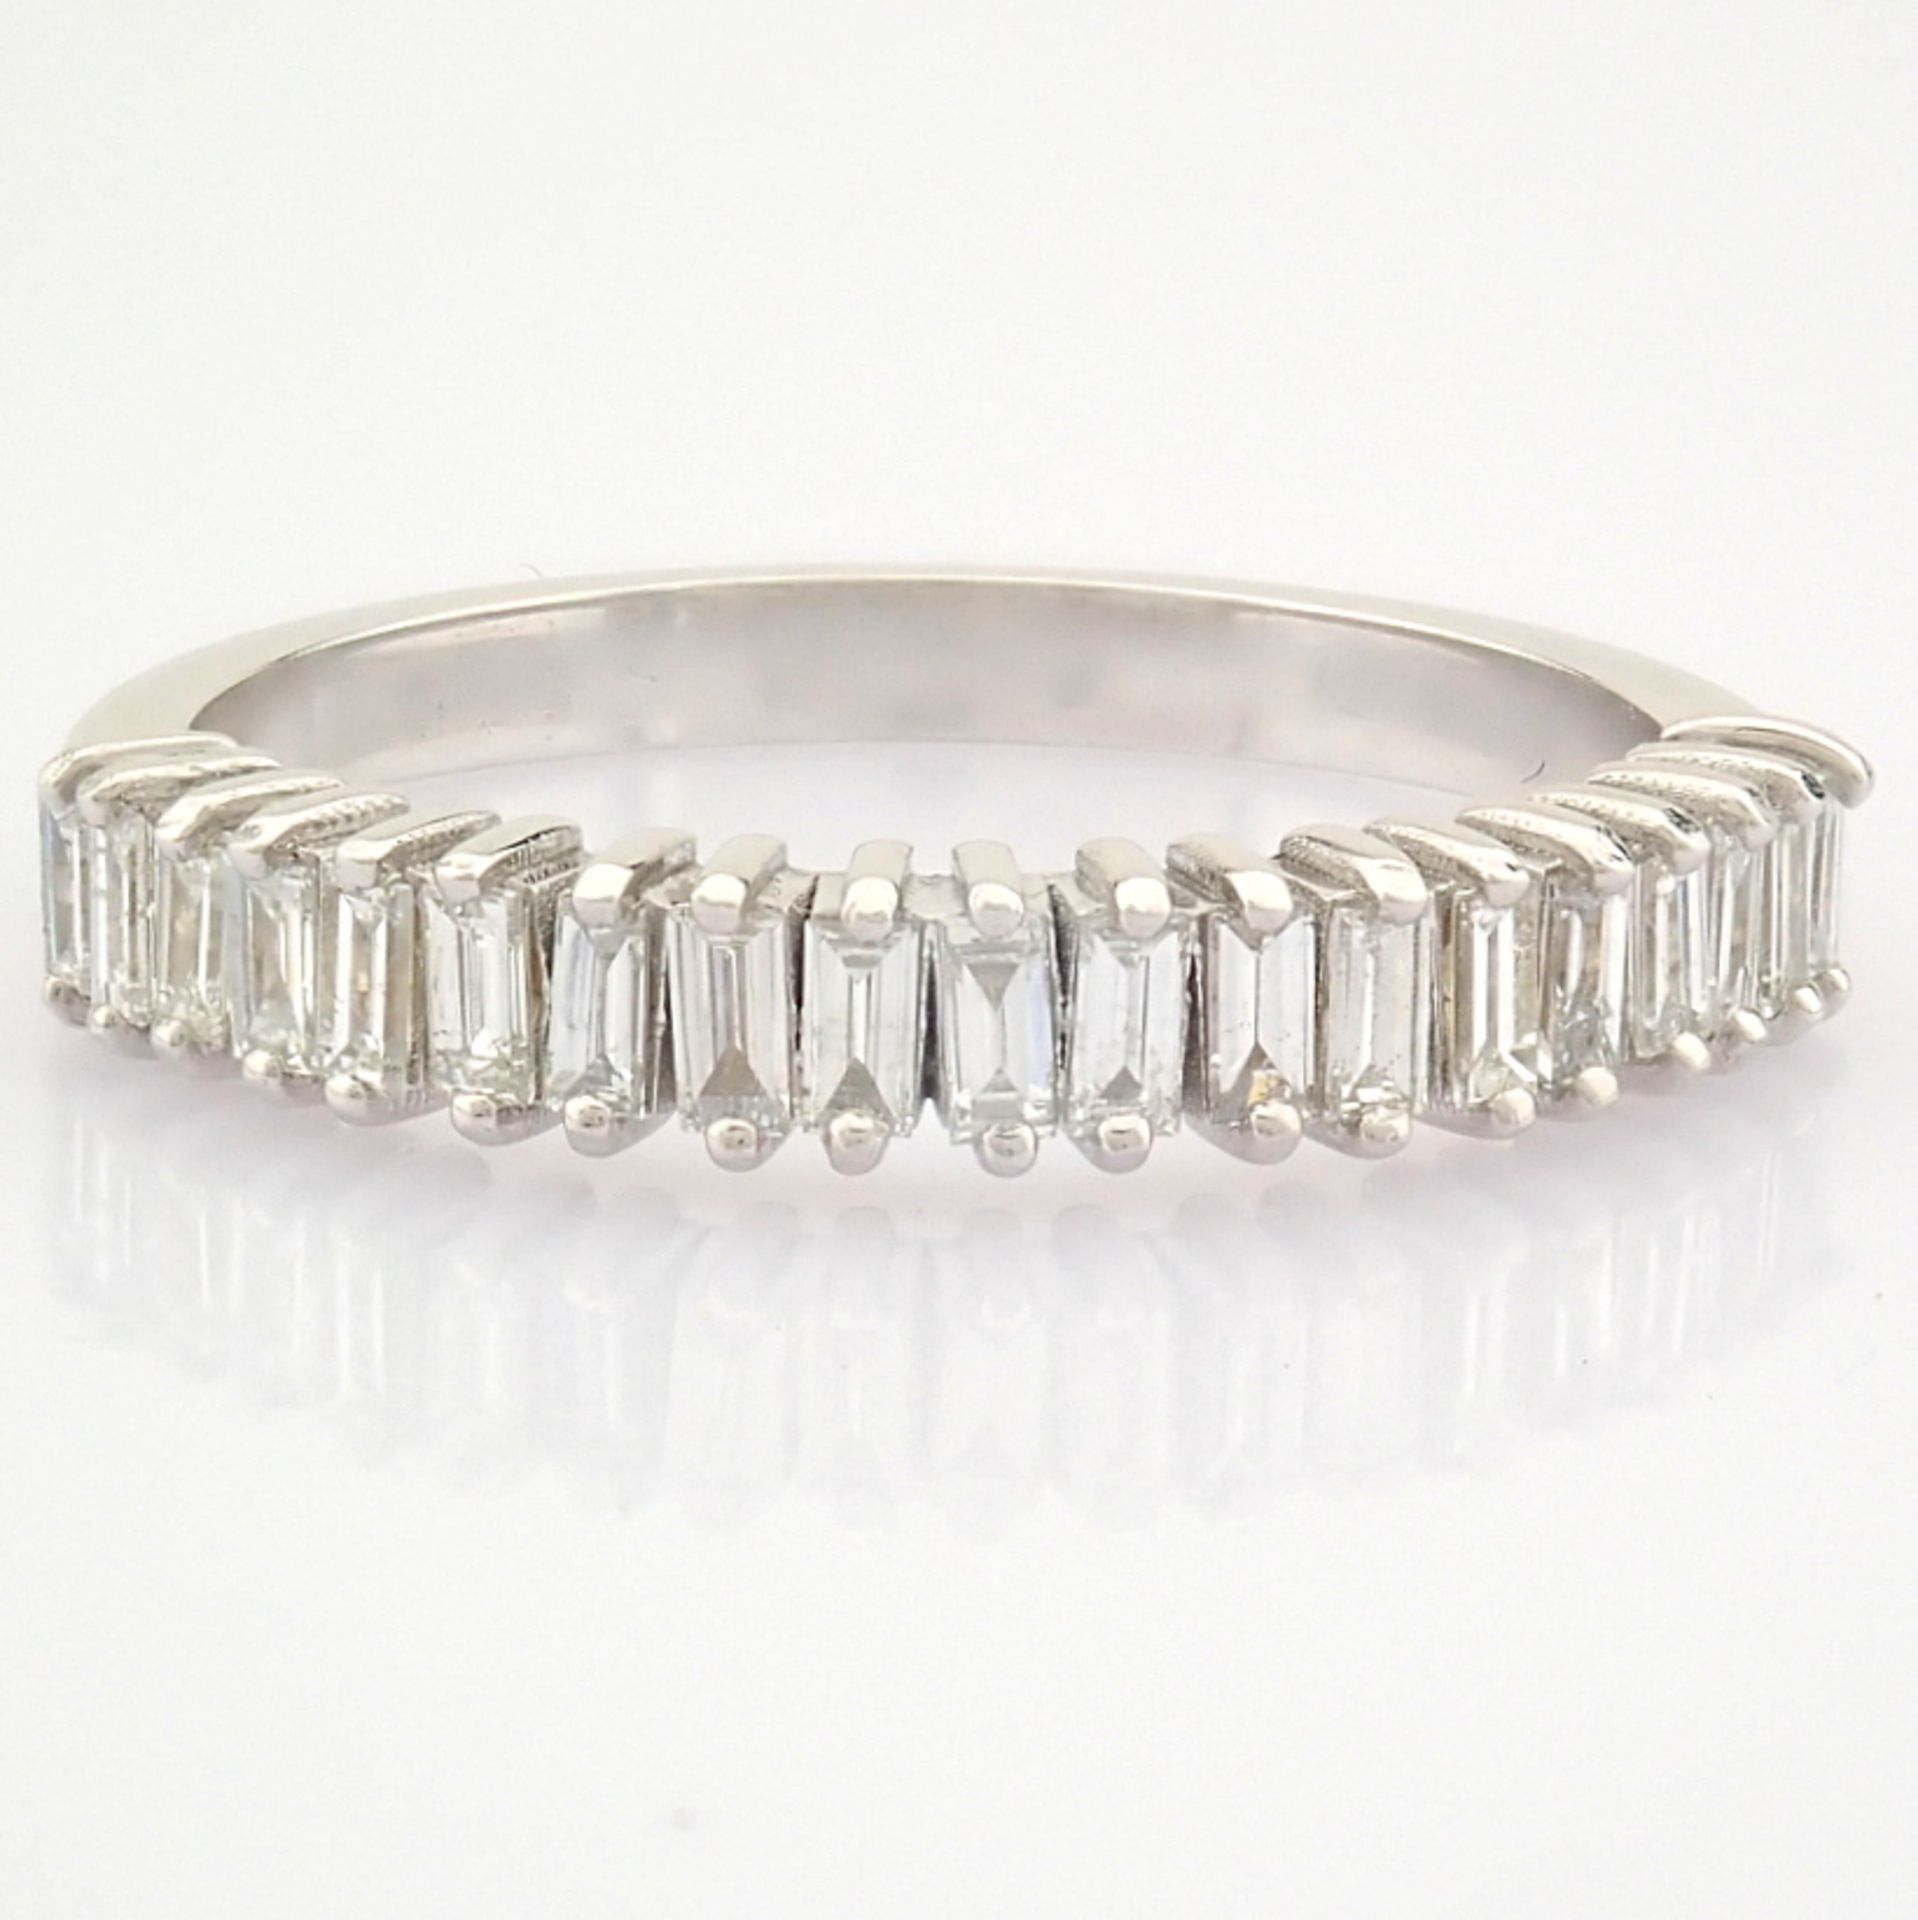 Certificated 14K White Gold Baguette Diamond Ring (Total 0.43 ct Stone) - Image 5 of 8